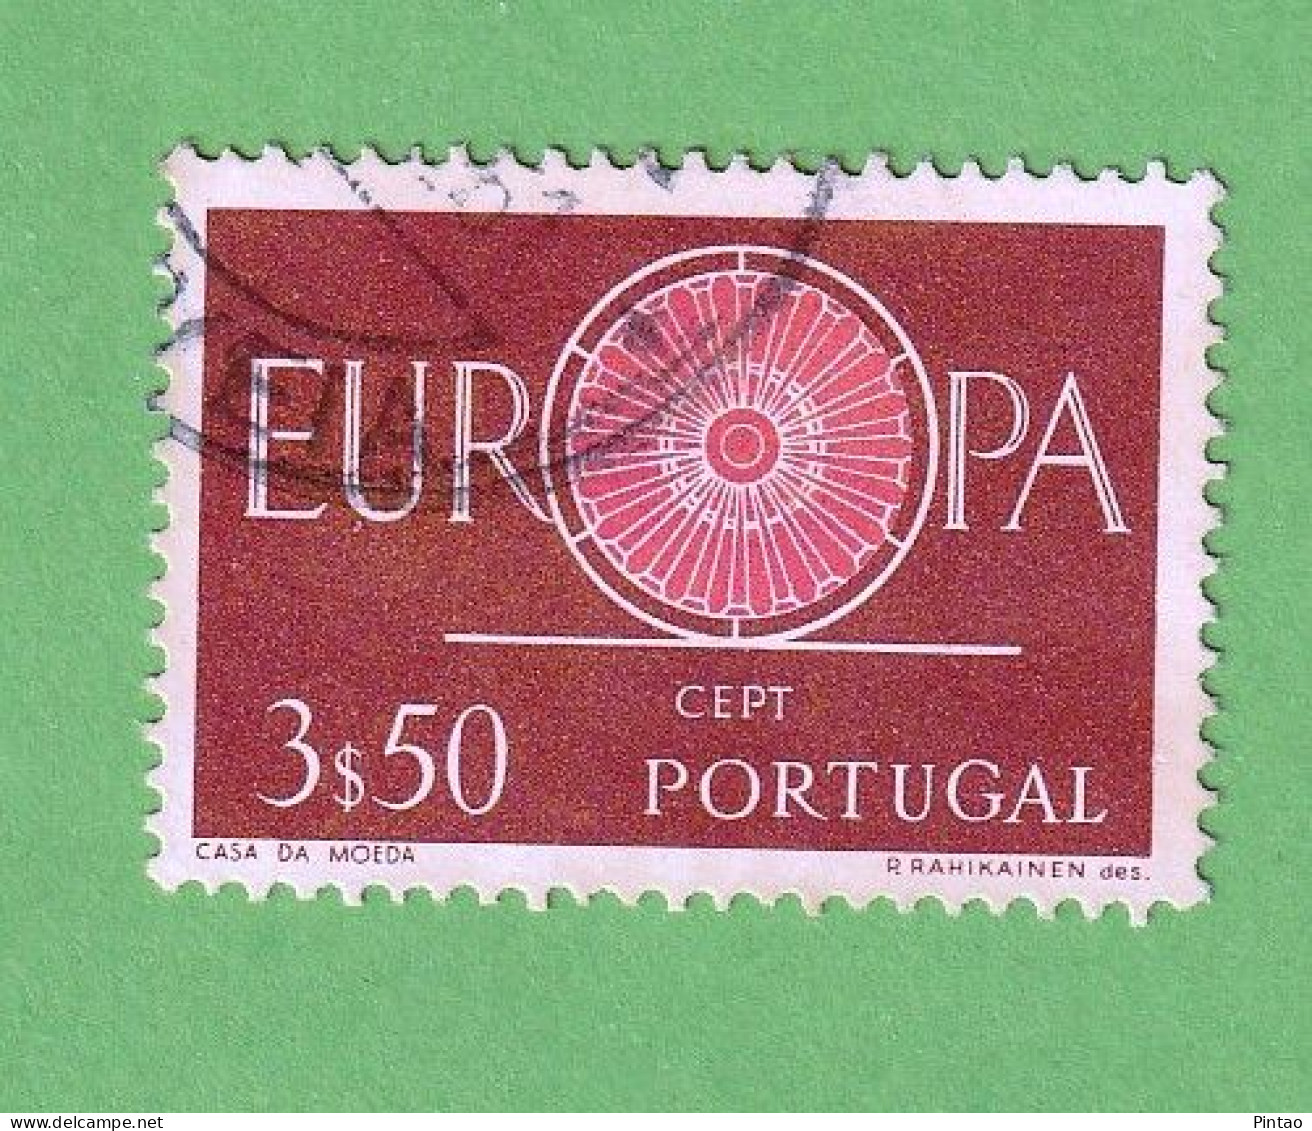 PTS14597- PORTUGAL 1960 Nº 870- USD (EUROPA CEPT) - Used Stamps